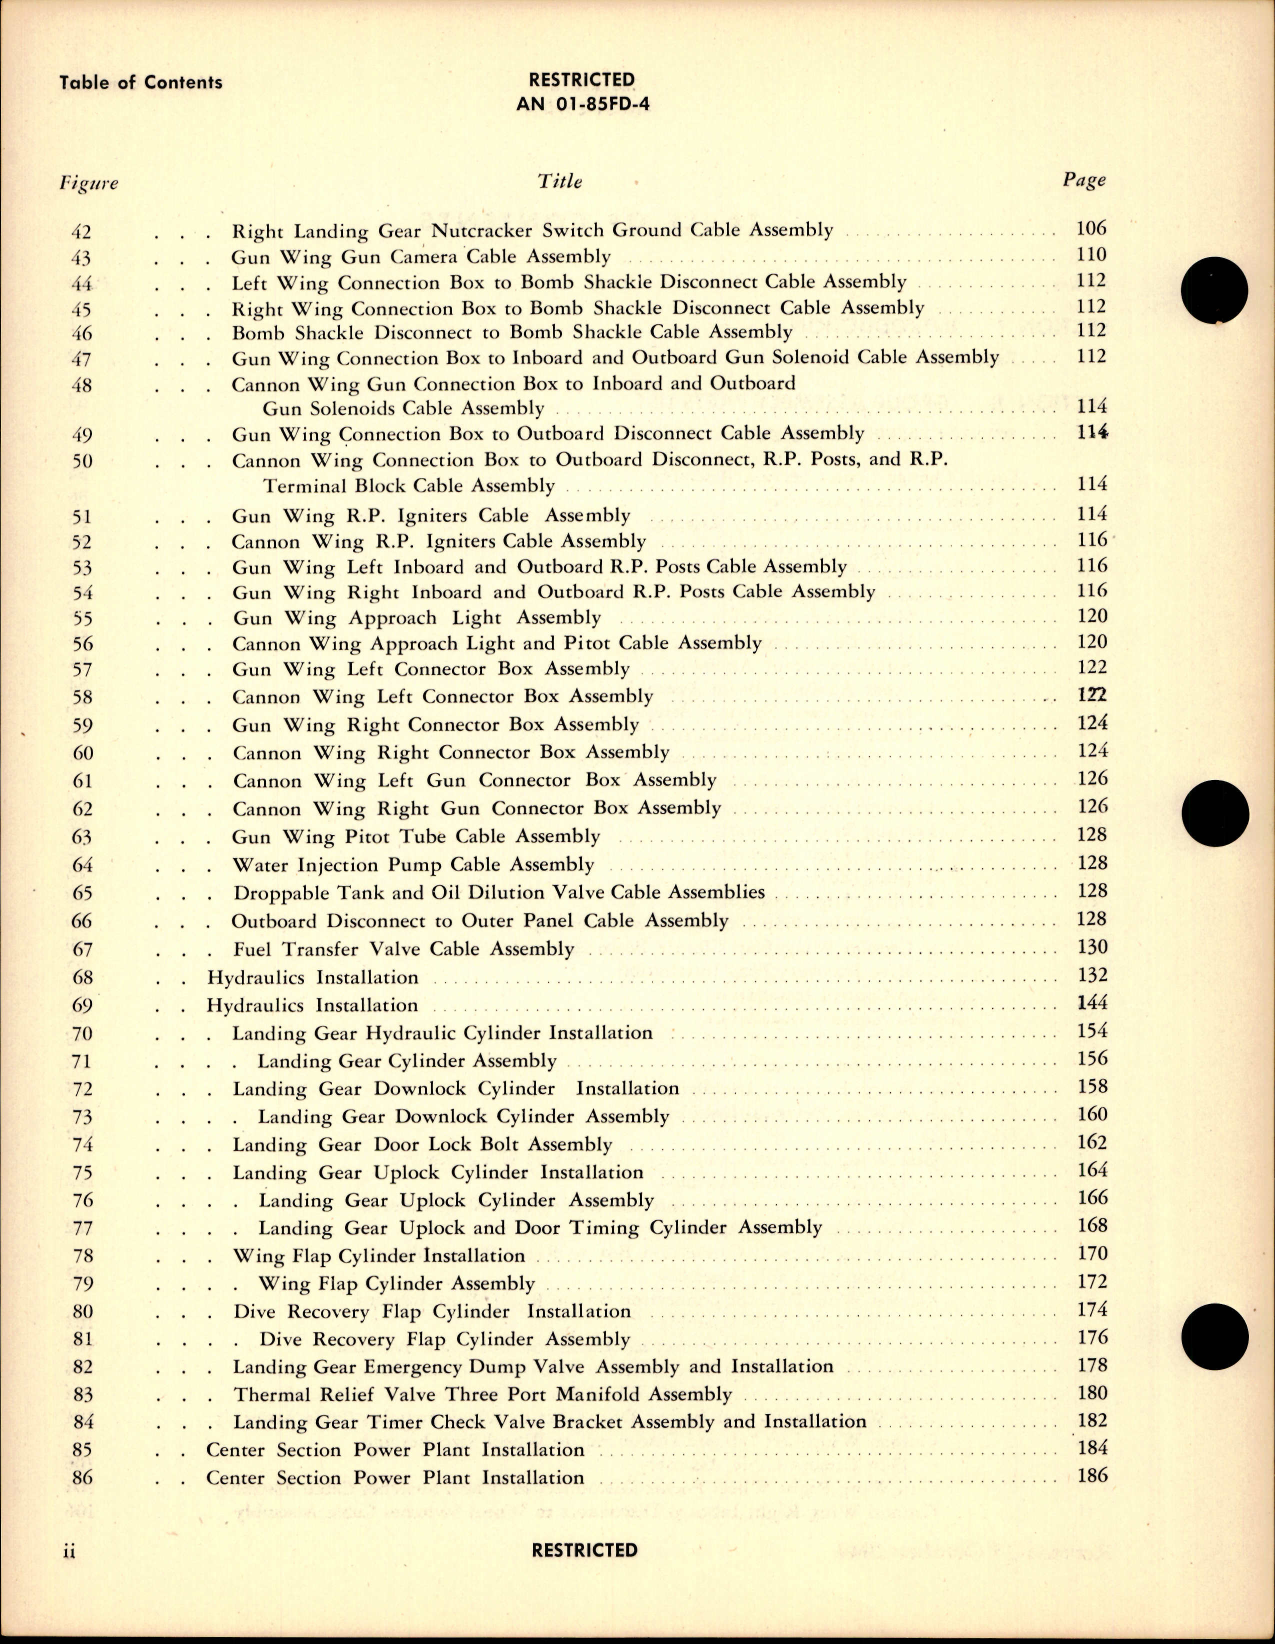 Sample page 6 from AirCorps Library document: Parts Catalog for Navy Models F8F-1, F8F-1B, F8F-1N, F8F-2, F8F-2N, F8F-2P